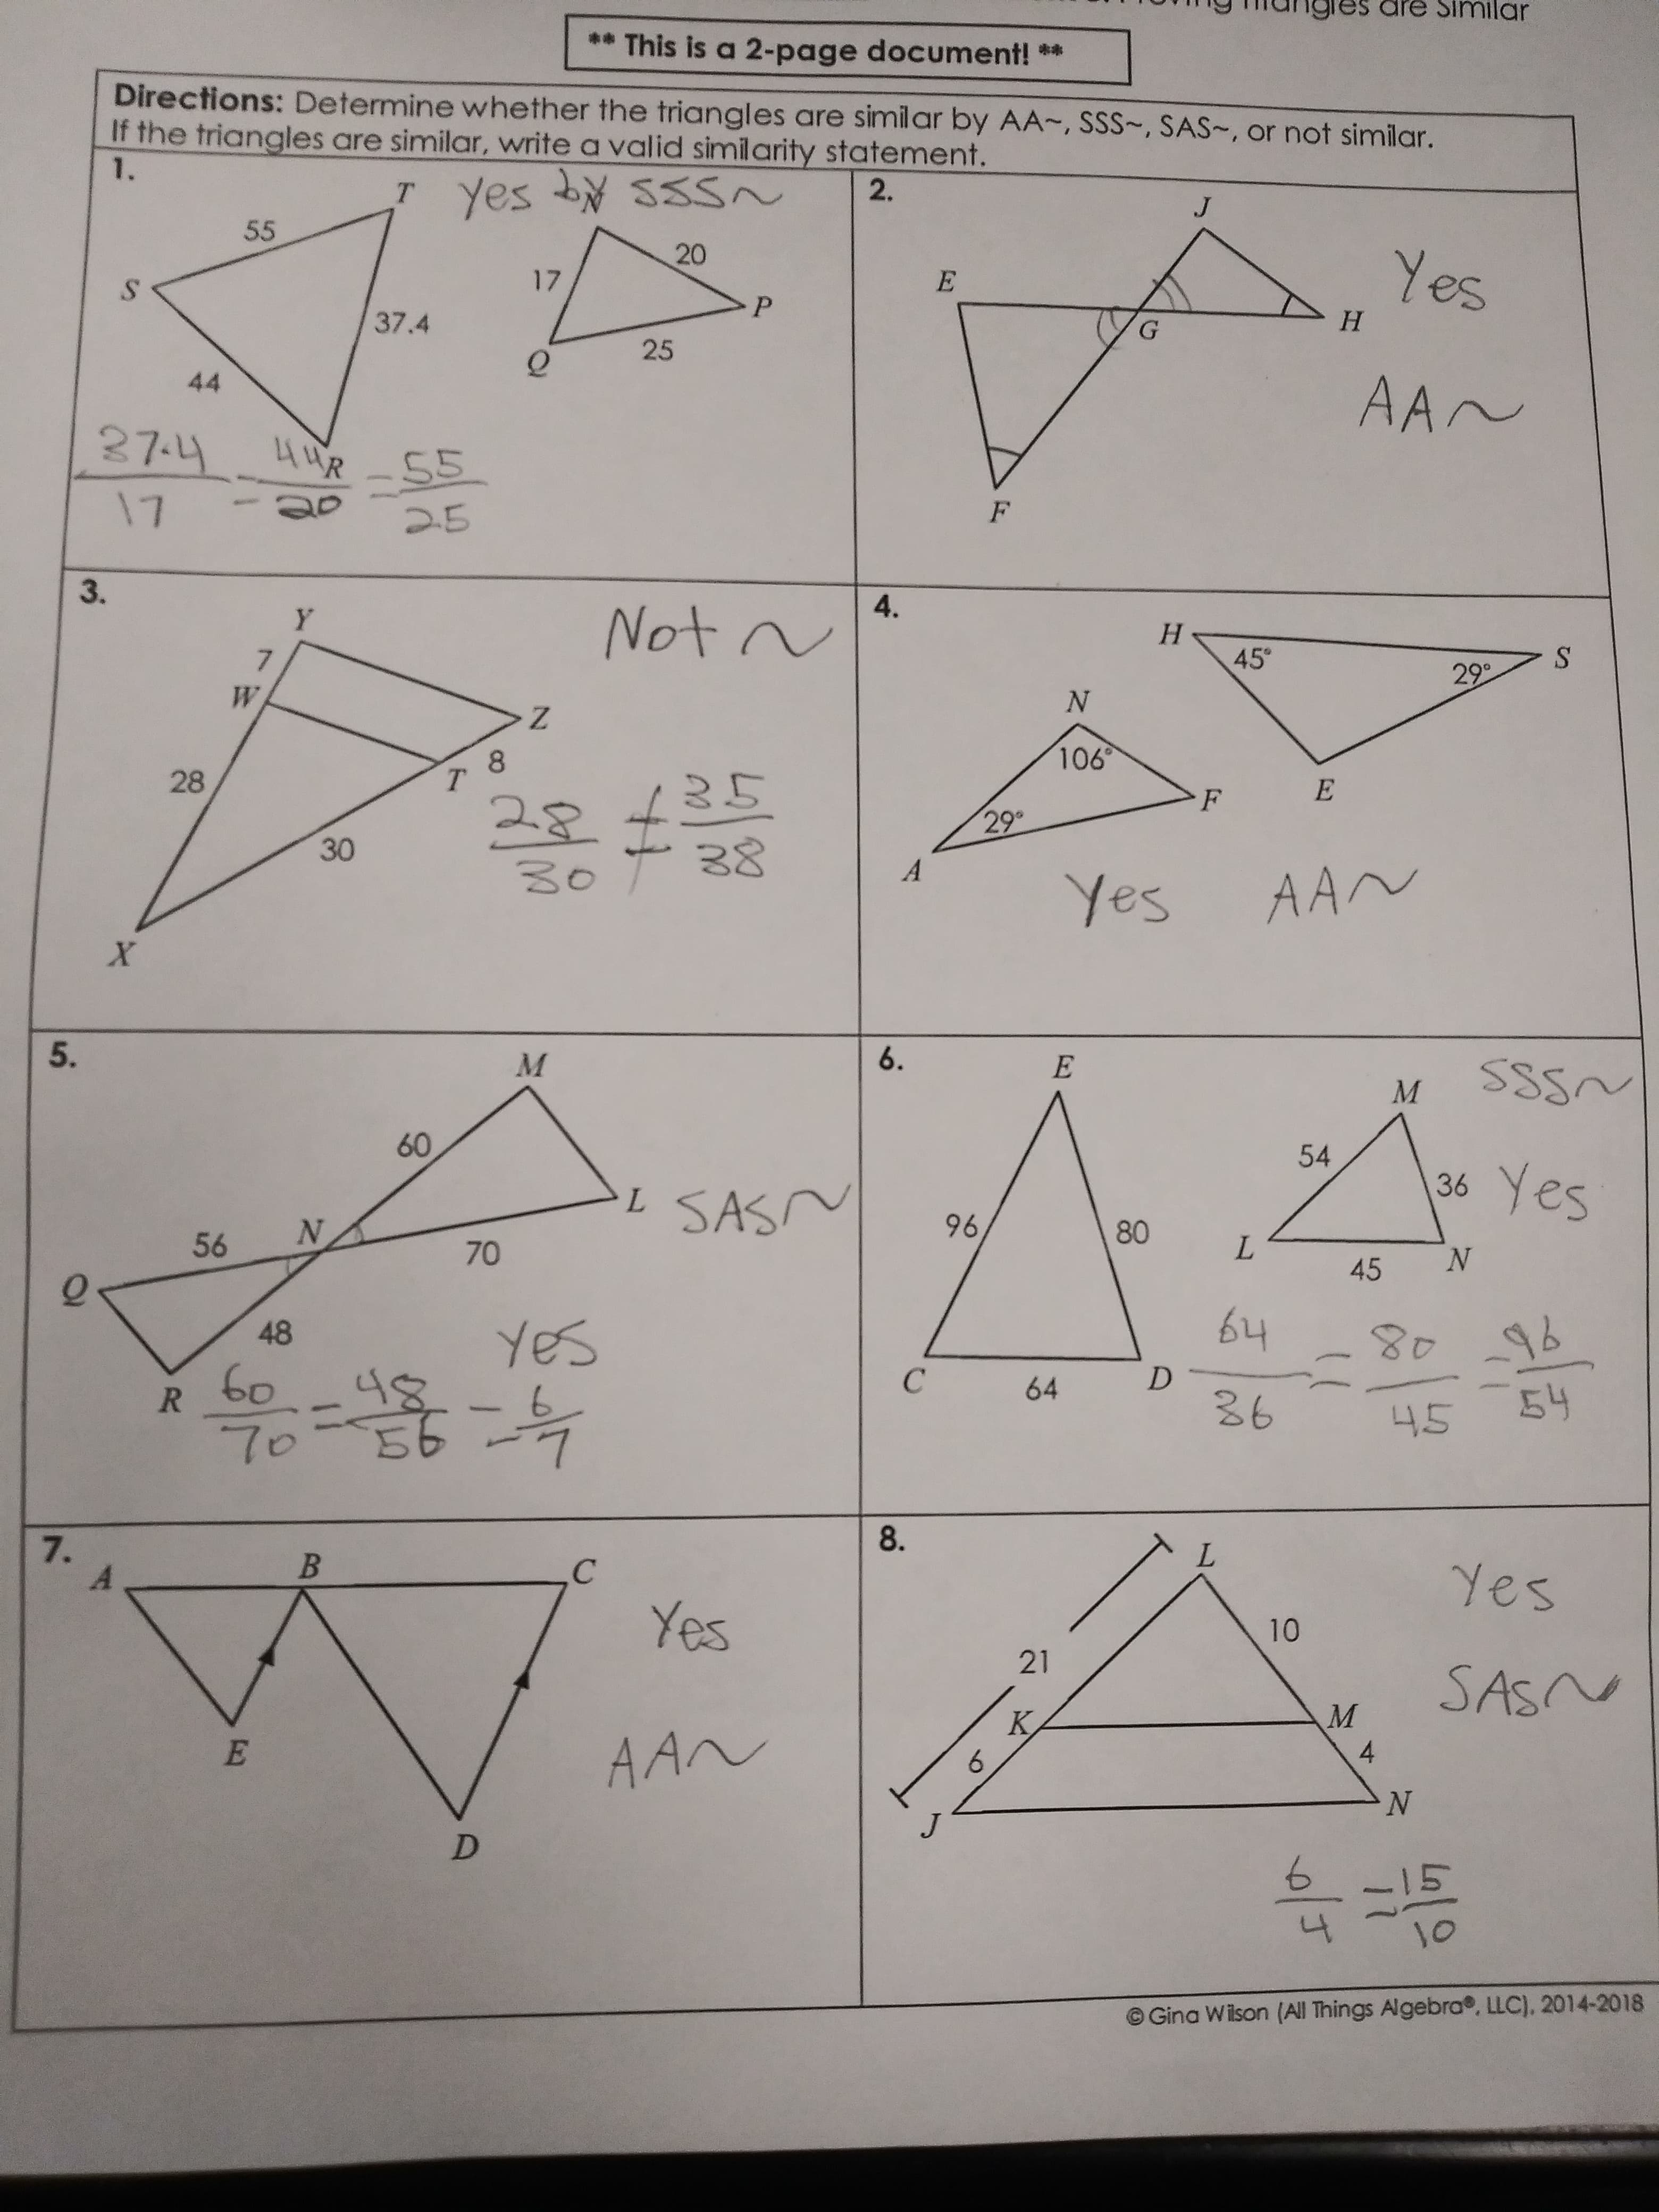 8.
30
28
3.
es are Sinmilar
** This is a 2-page document! **
Directions: Determine whether the triangles are similar by AA-, SSS~, SAS~, or not similar.
If the triangles are similar, write a valid similarity statement.
2.
1.
55
20
P.
17
H.
37.4
AA~
25
44
27.444R-55
de.
25
4.
Not ~
H.
45°
7.
>F
29
A.
30
6.
E.
5.
54
60,
L SASN
96,
45
48
64
54
48
6.
C.
45
8.
C.
Yes
7.
Yes
A.
21
4.
AN
10
OGina Wilson (All Things Algebra, LLC), 2014-2018
